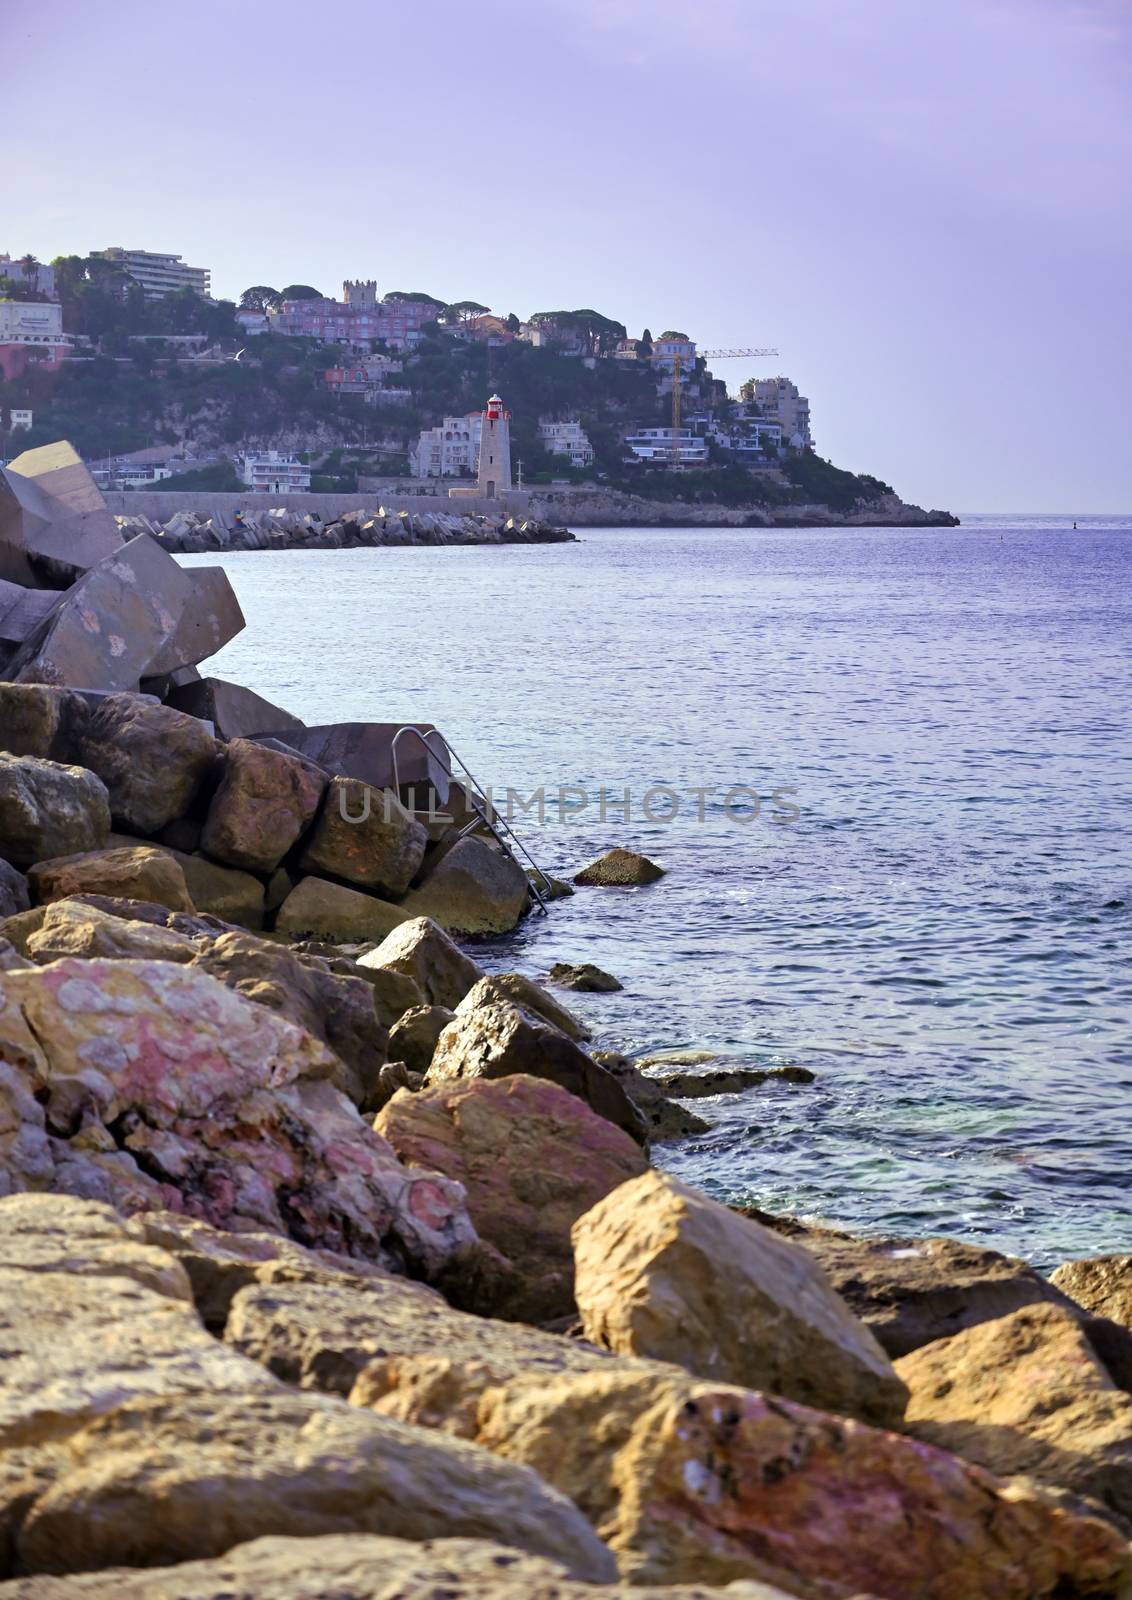 The coastline on the Mediterranean Sea at Nice, France along the French Riviera.